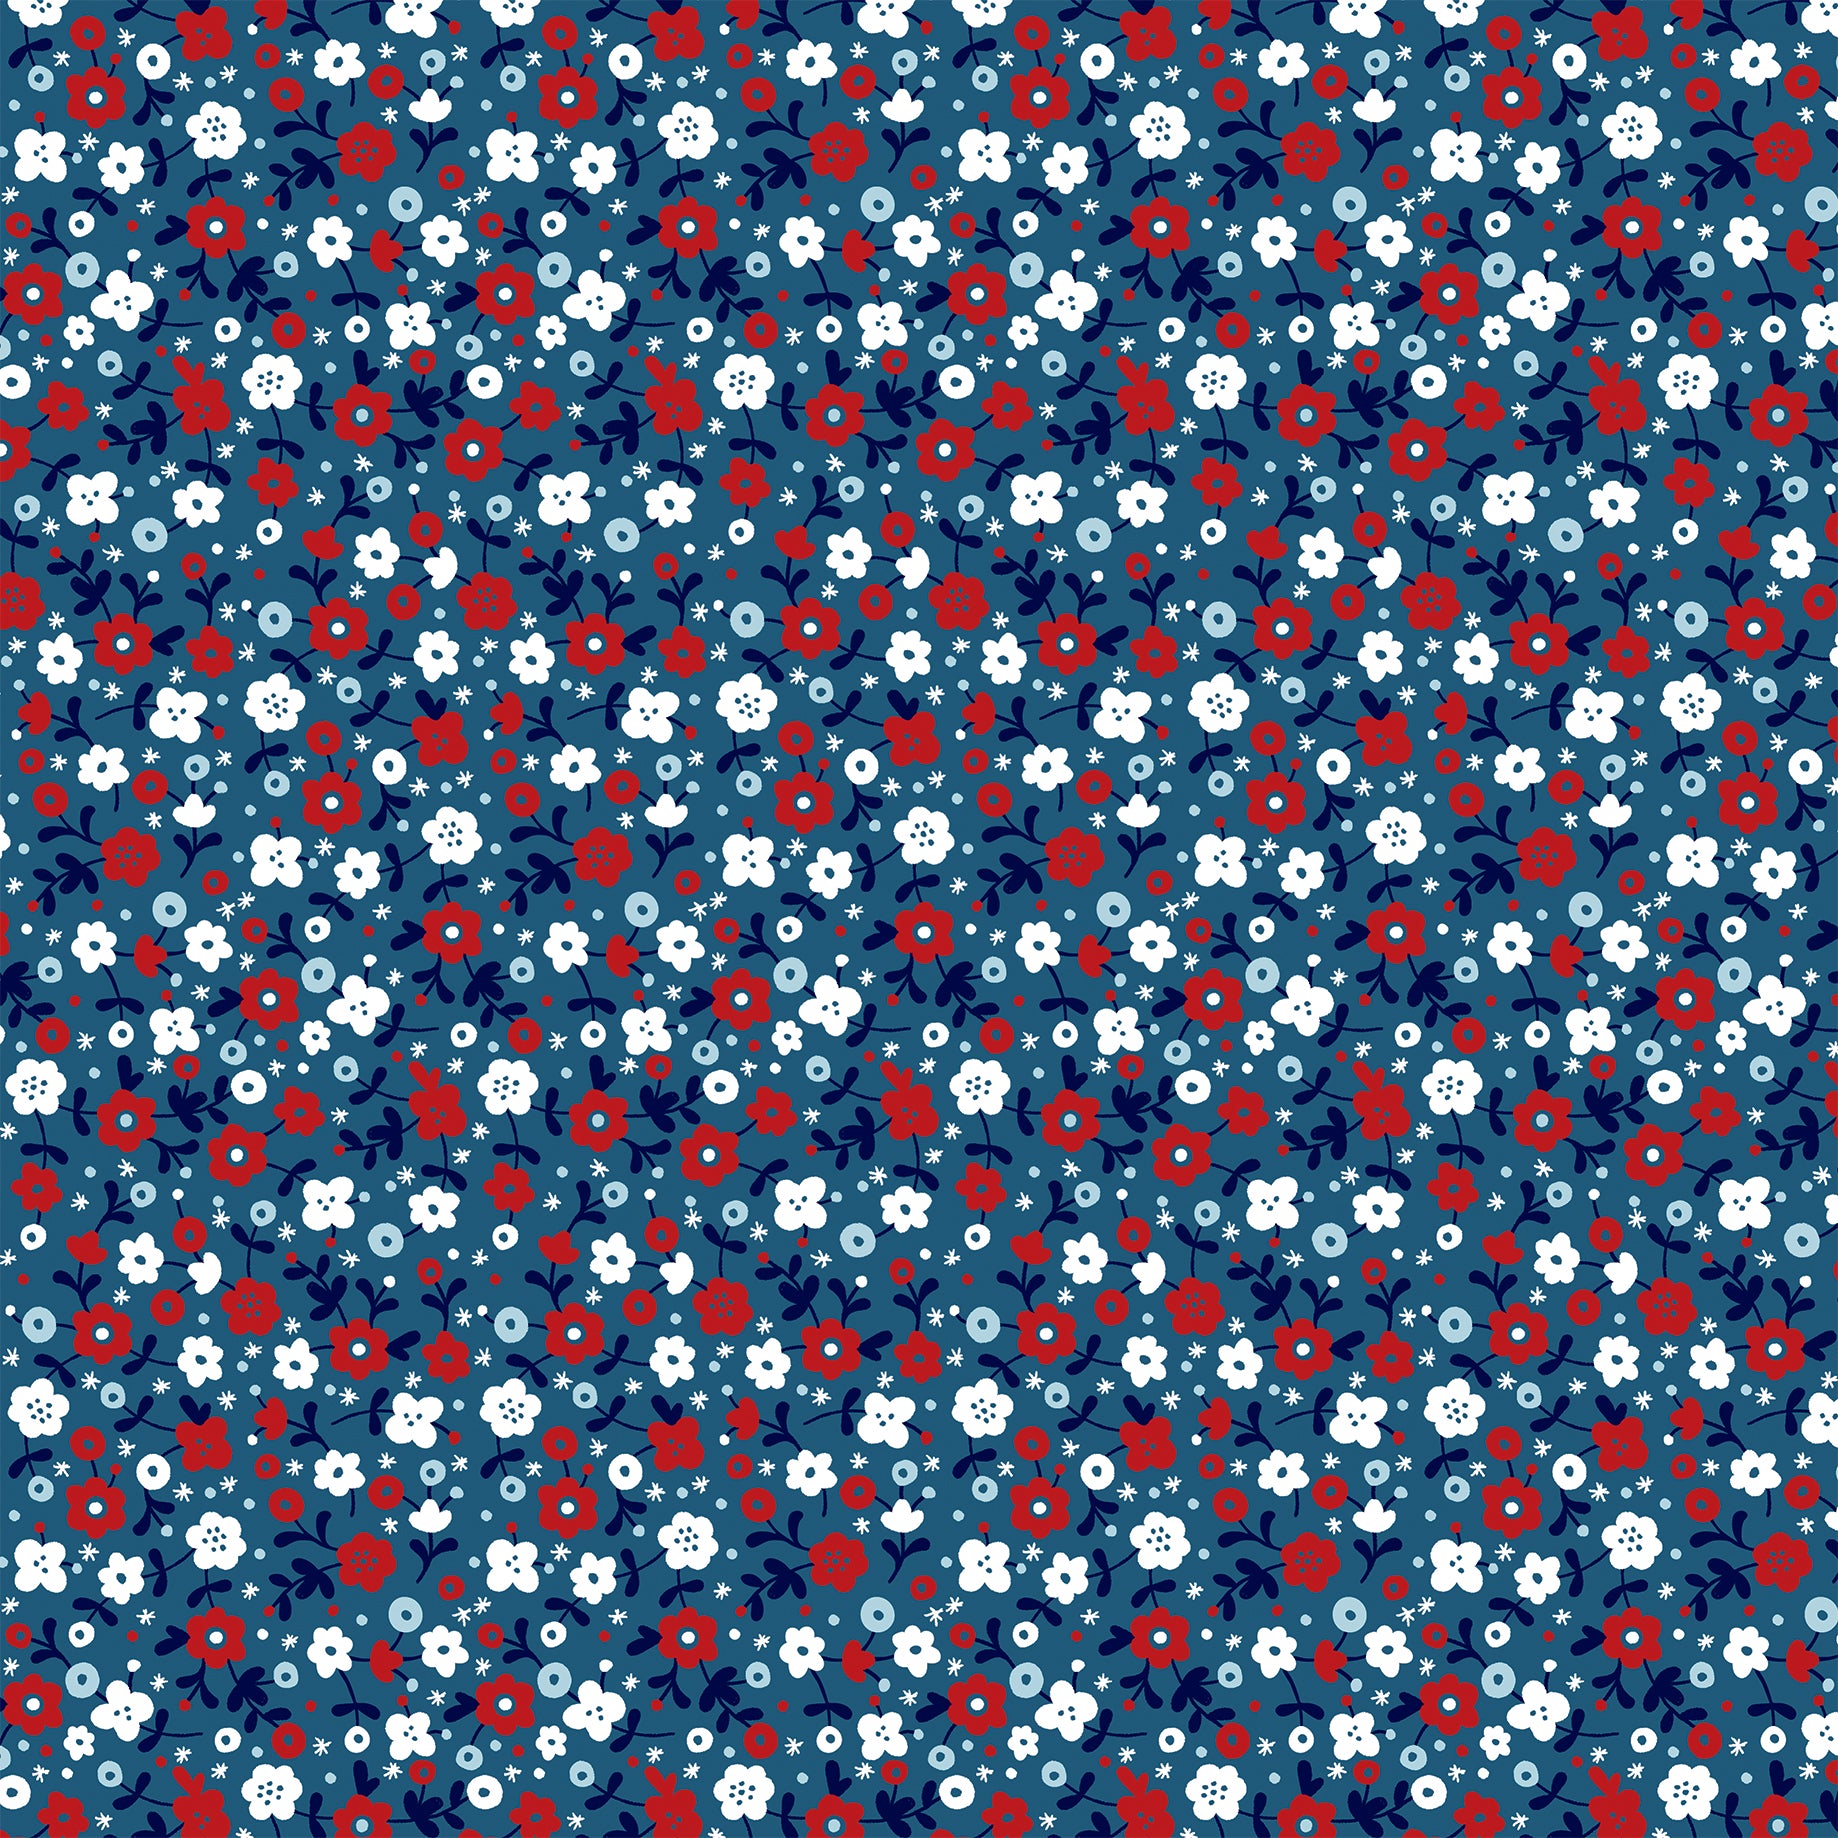 Stars and Stripes Forever Collection Flowers For The Fourth 12 x 12 Double-Sided Scrapbook Paper by Echo Park Paper